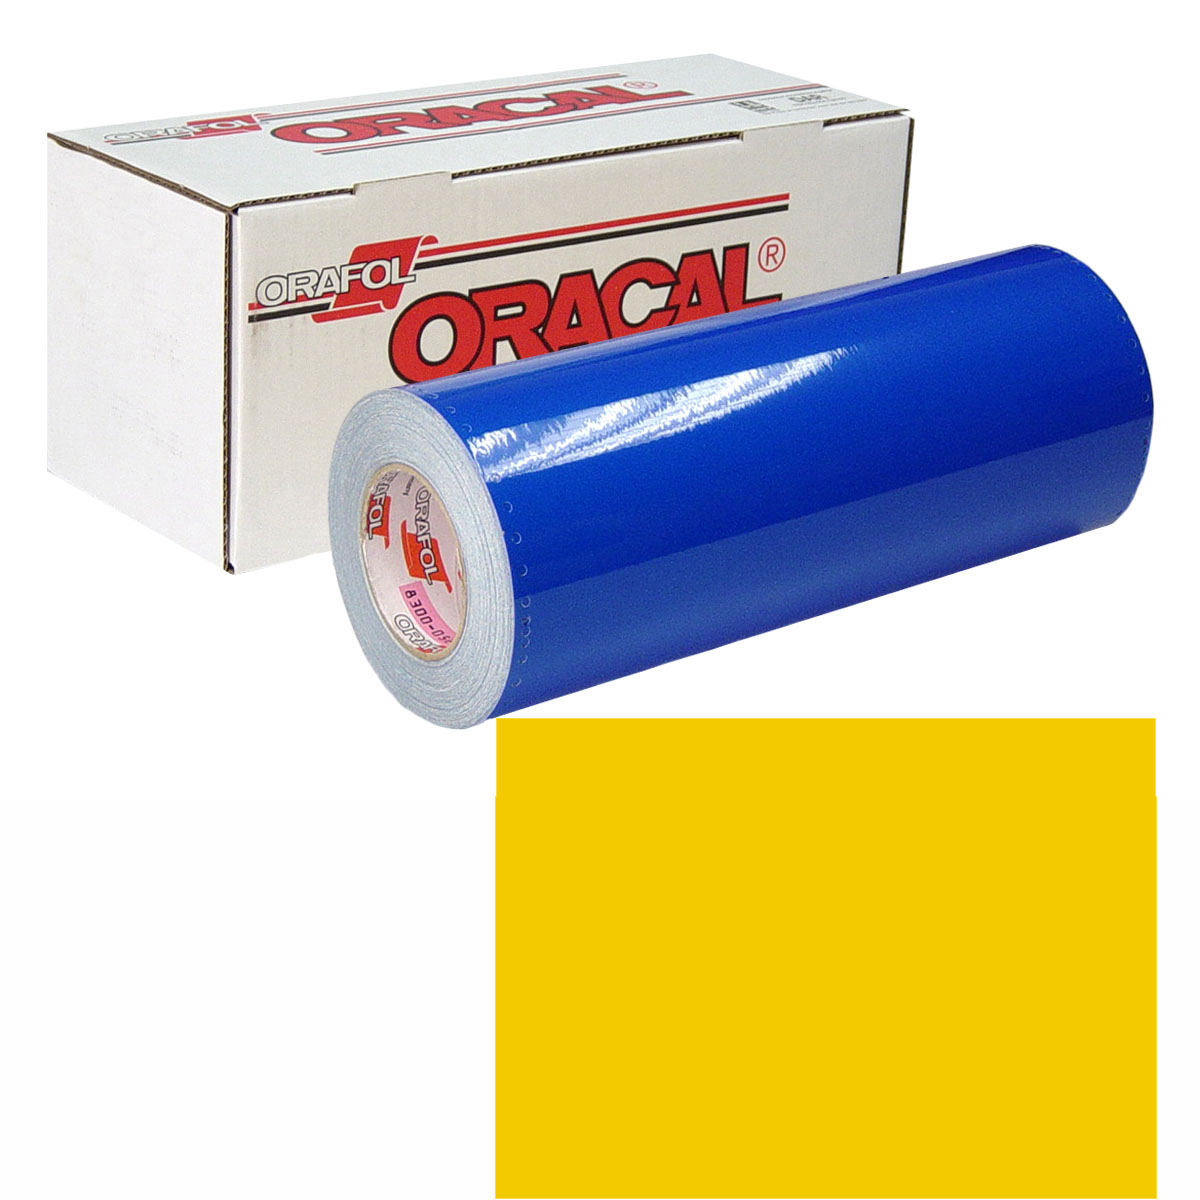 ORACAL 631 30in X 50yd 022 Light Yellow